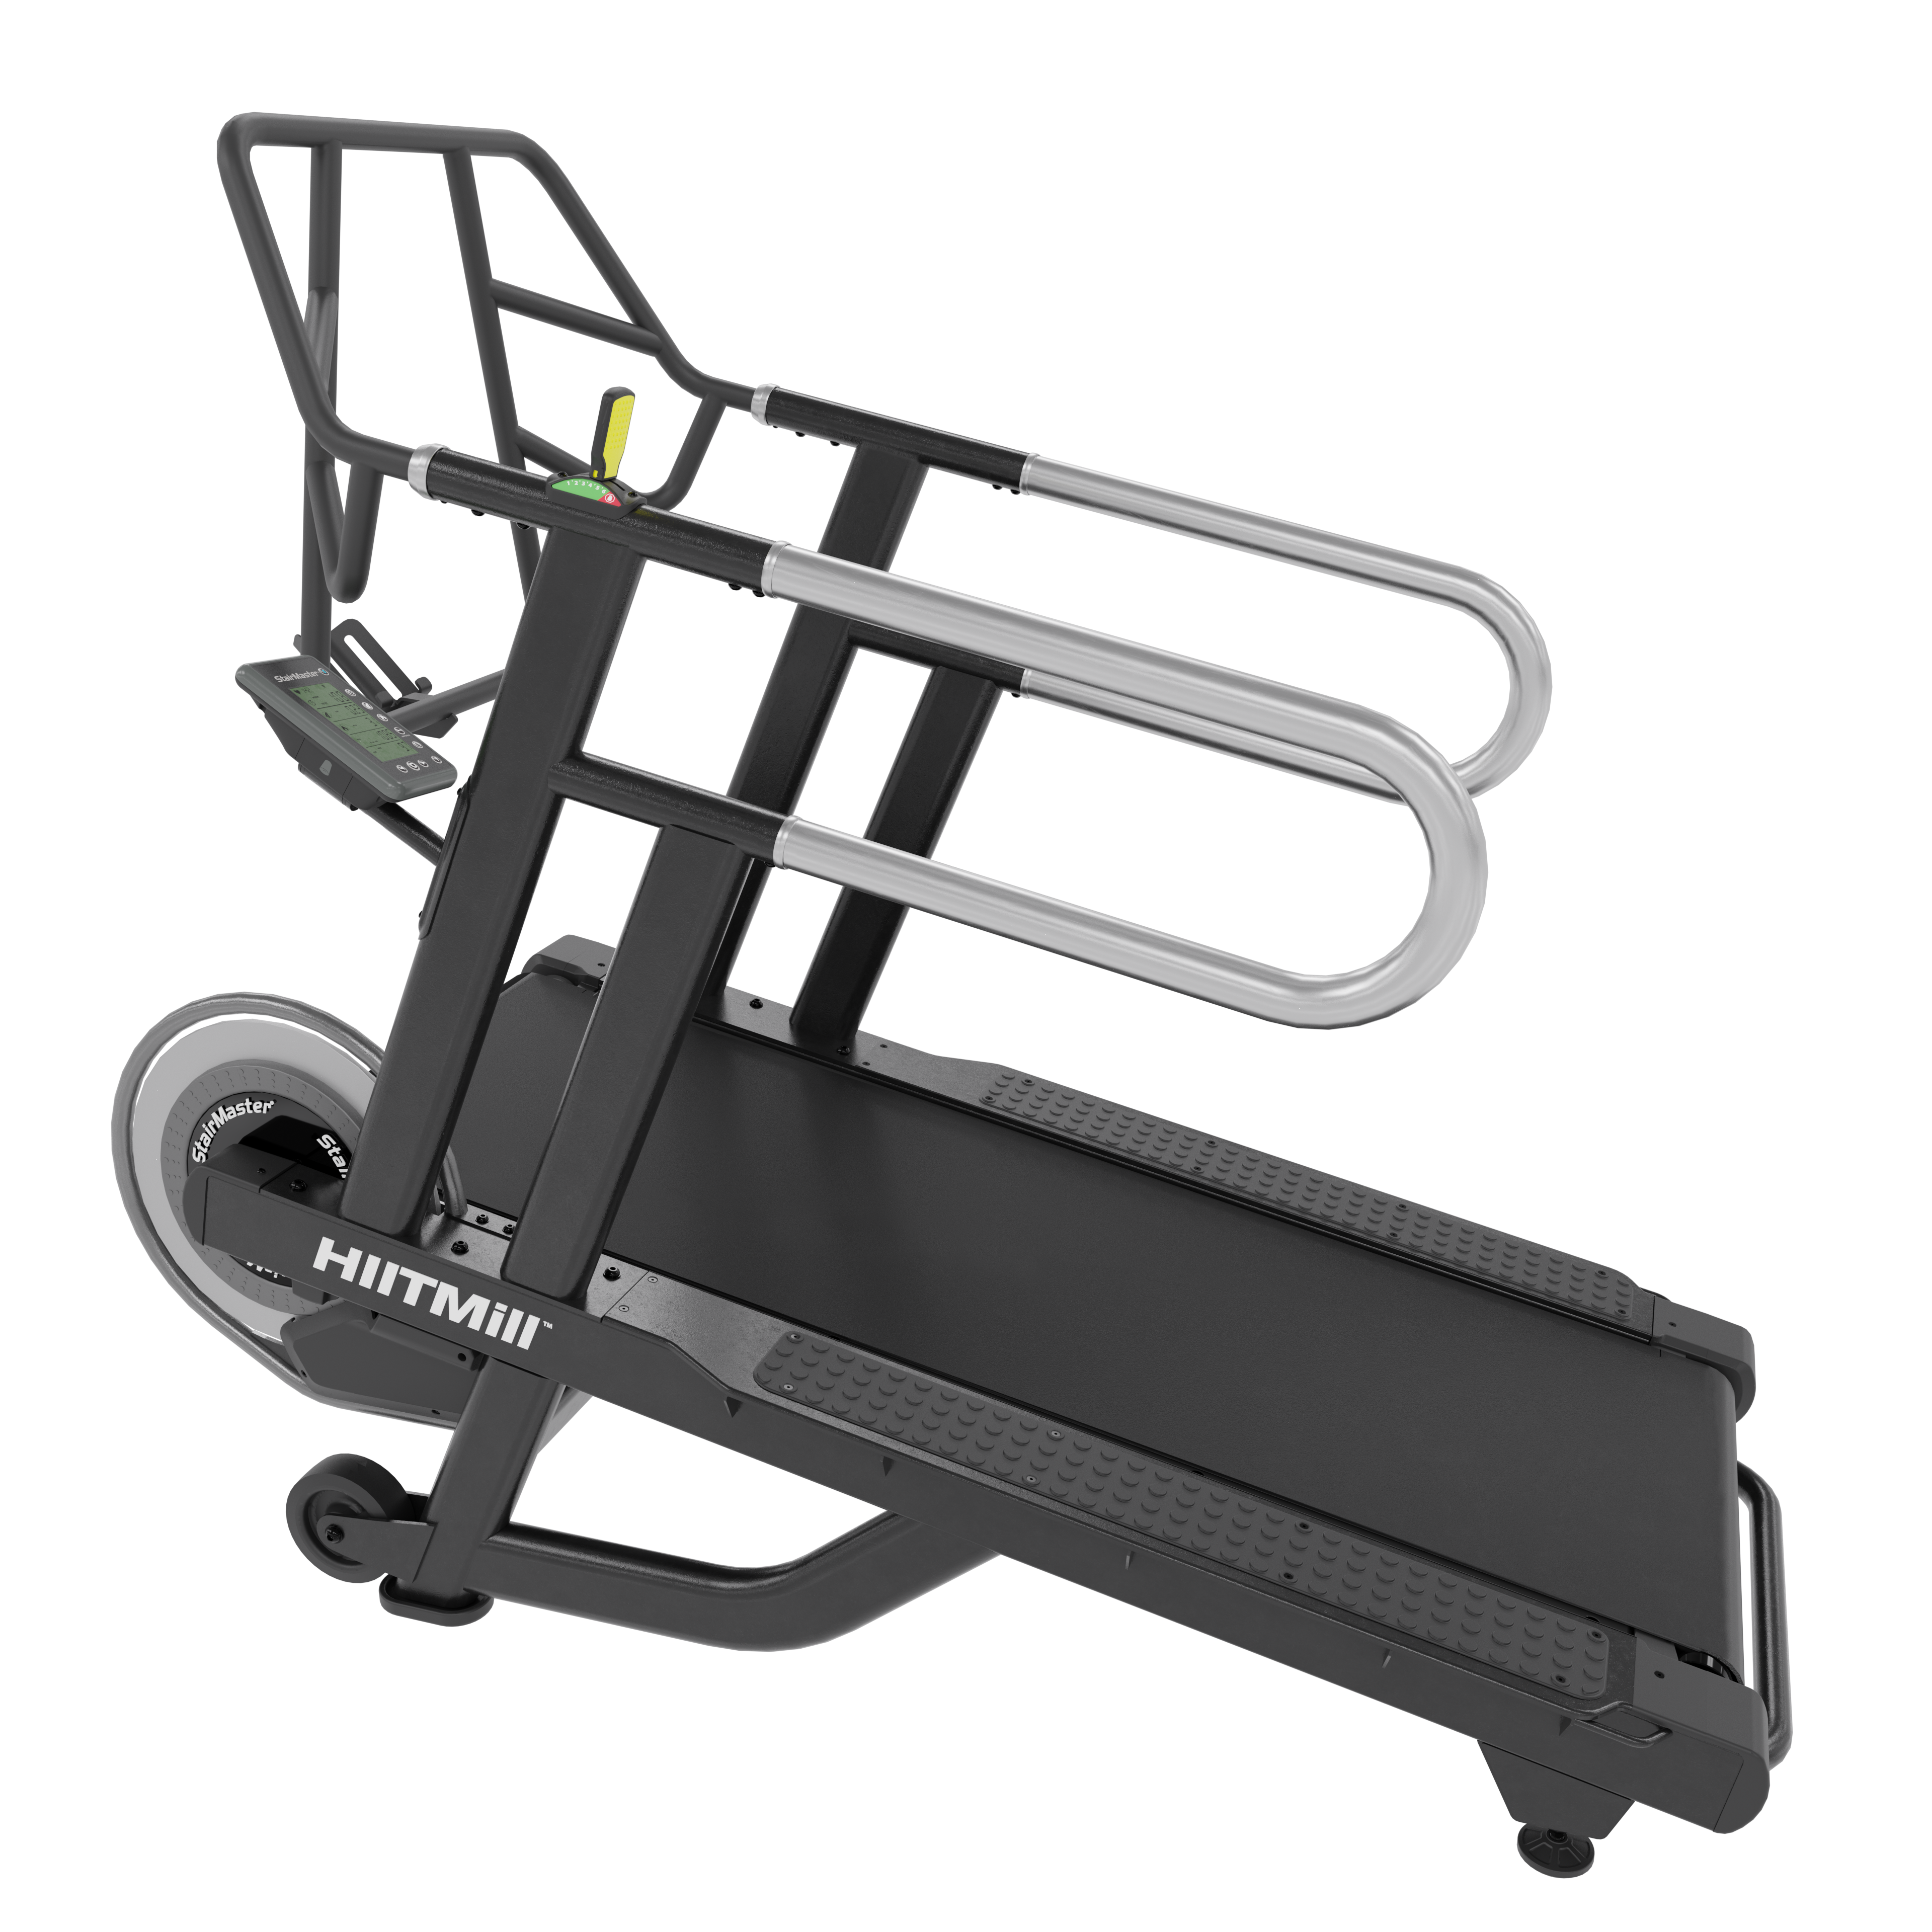 StairMaster HIITMill Product Image